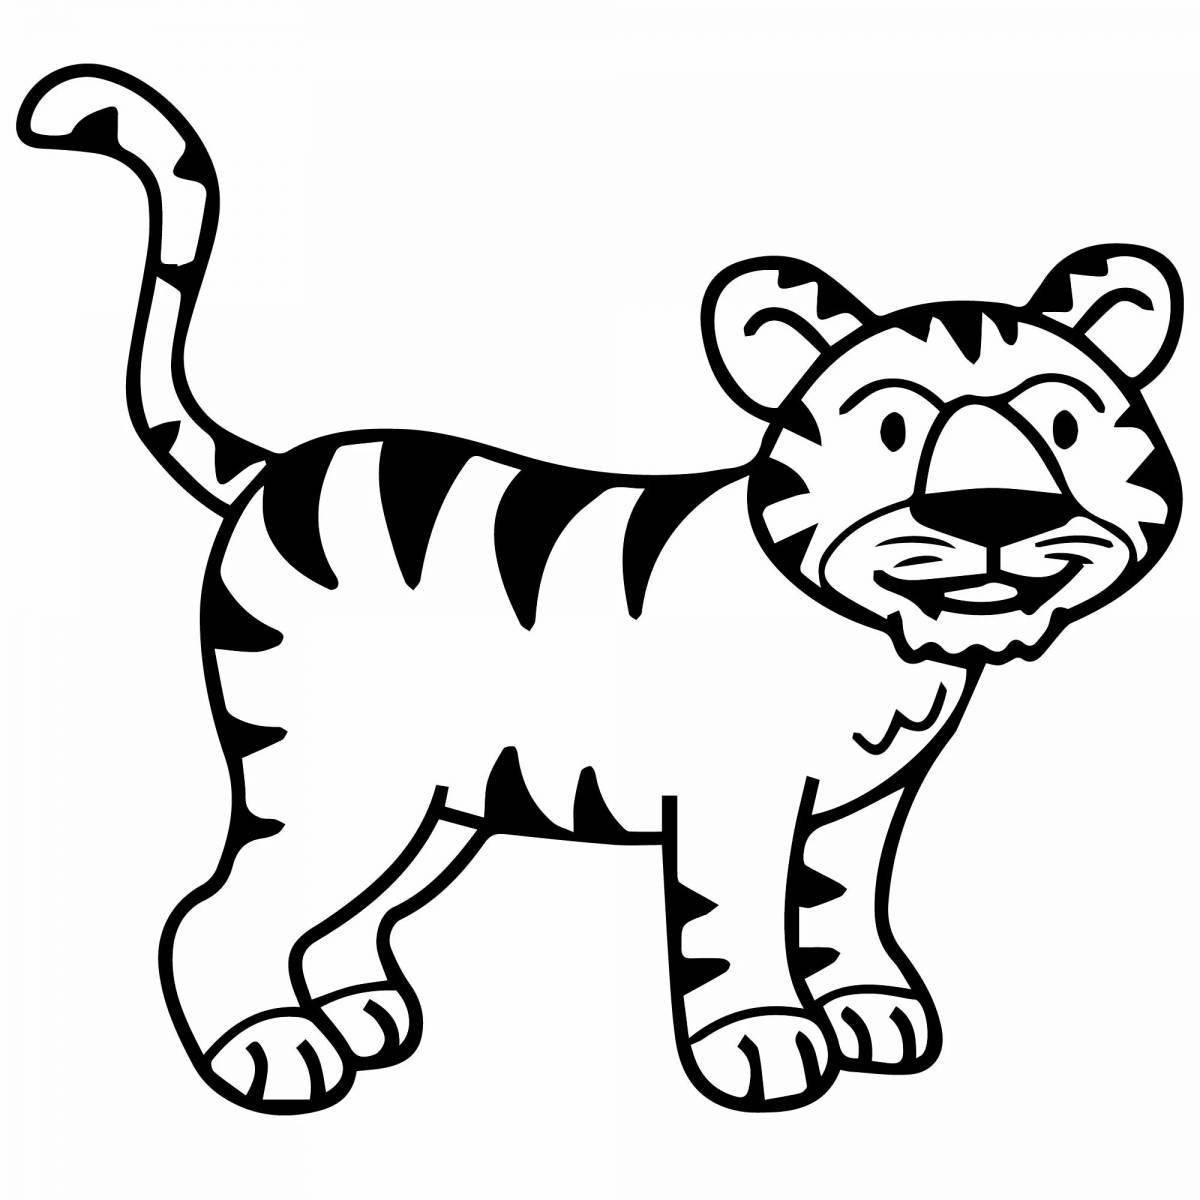 Dazzling tiger without stripes for children